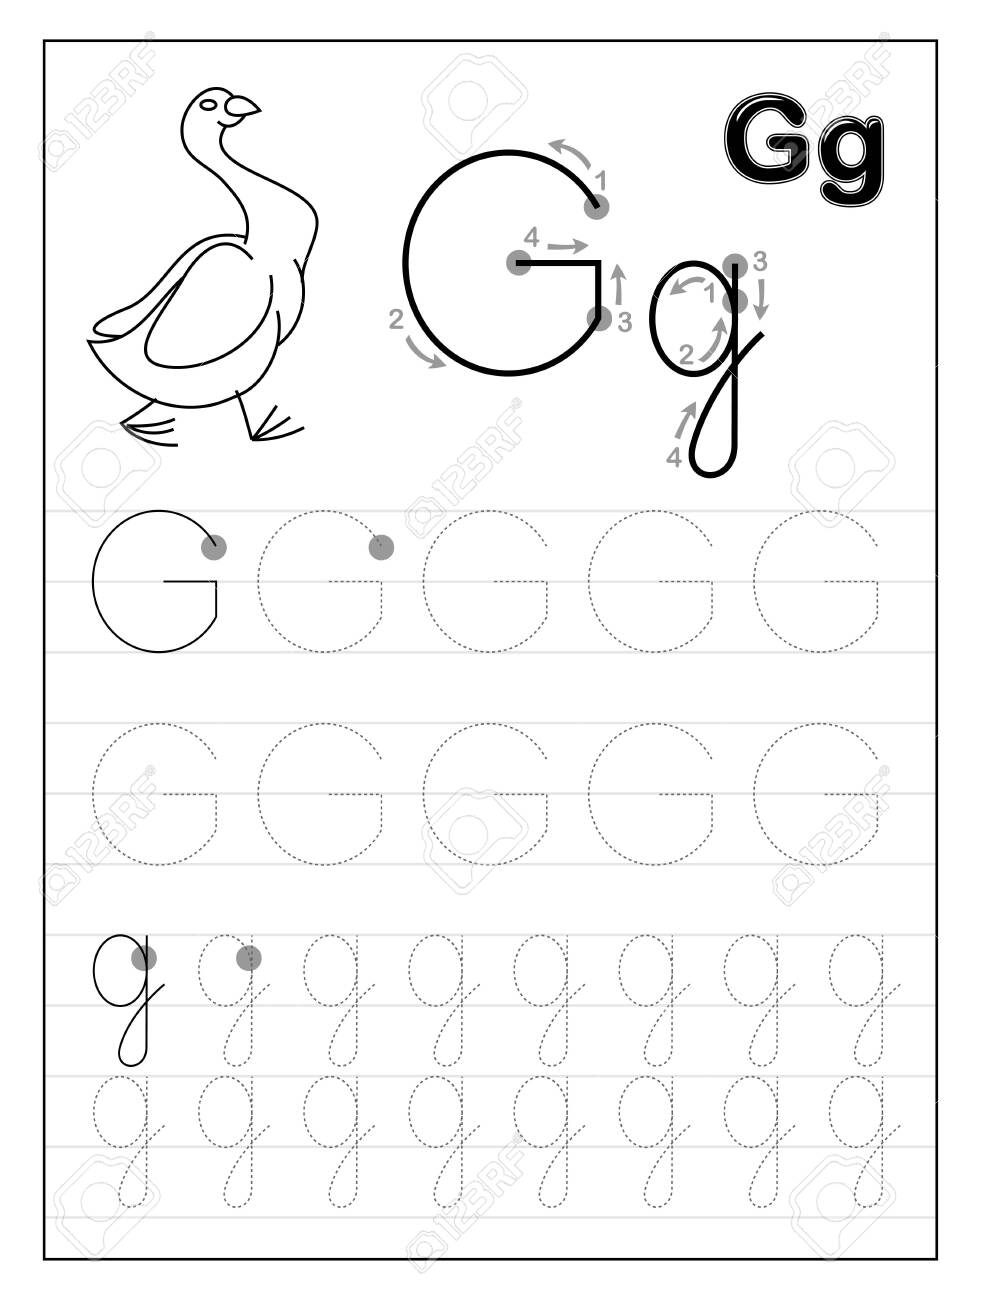 Tracing Alphabet Letter G. Black And White Educational Pages.. with G Letter Tracing